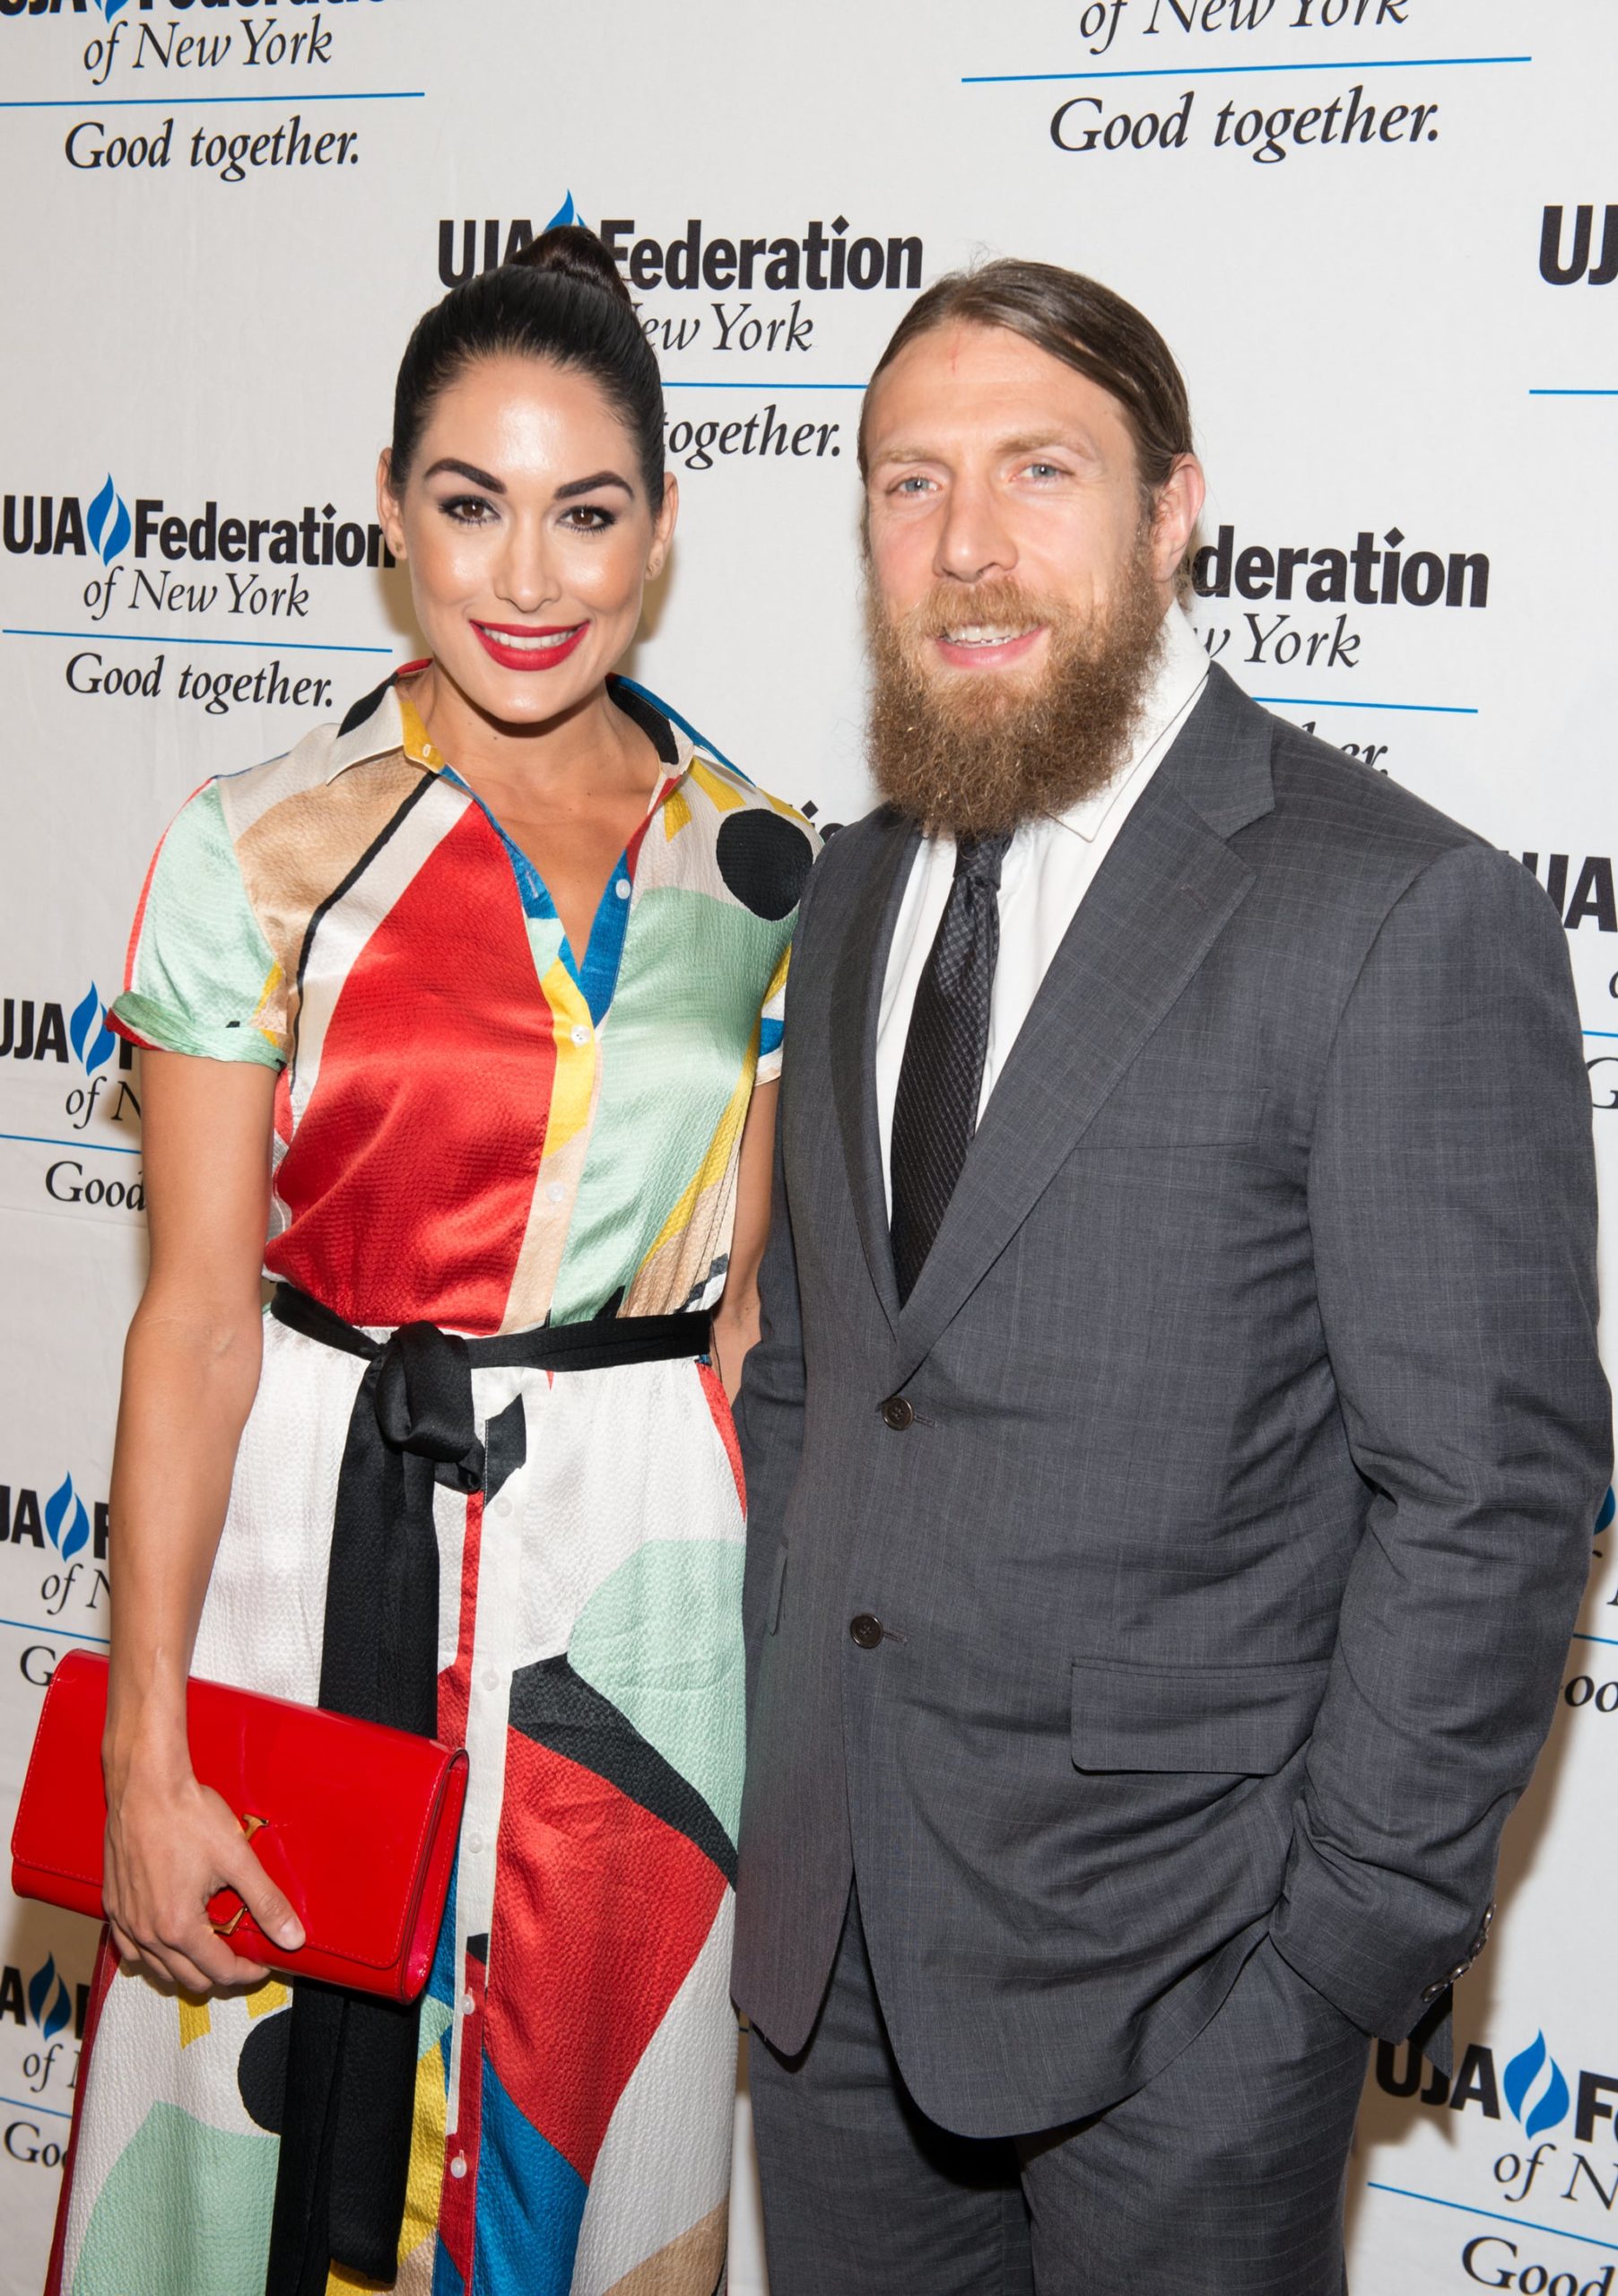 NEW YORK, NY - JUNE 02:  (L-R) Brie Bella and Daniel Bryan attend the UJA-Federation New York's Entertainment Division Signature Gala at 583 Park Avenue on June 2, 2015 in New York City.  (Photo by Noam Galai/WireImage)